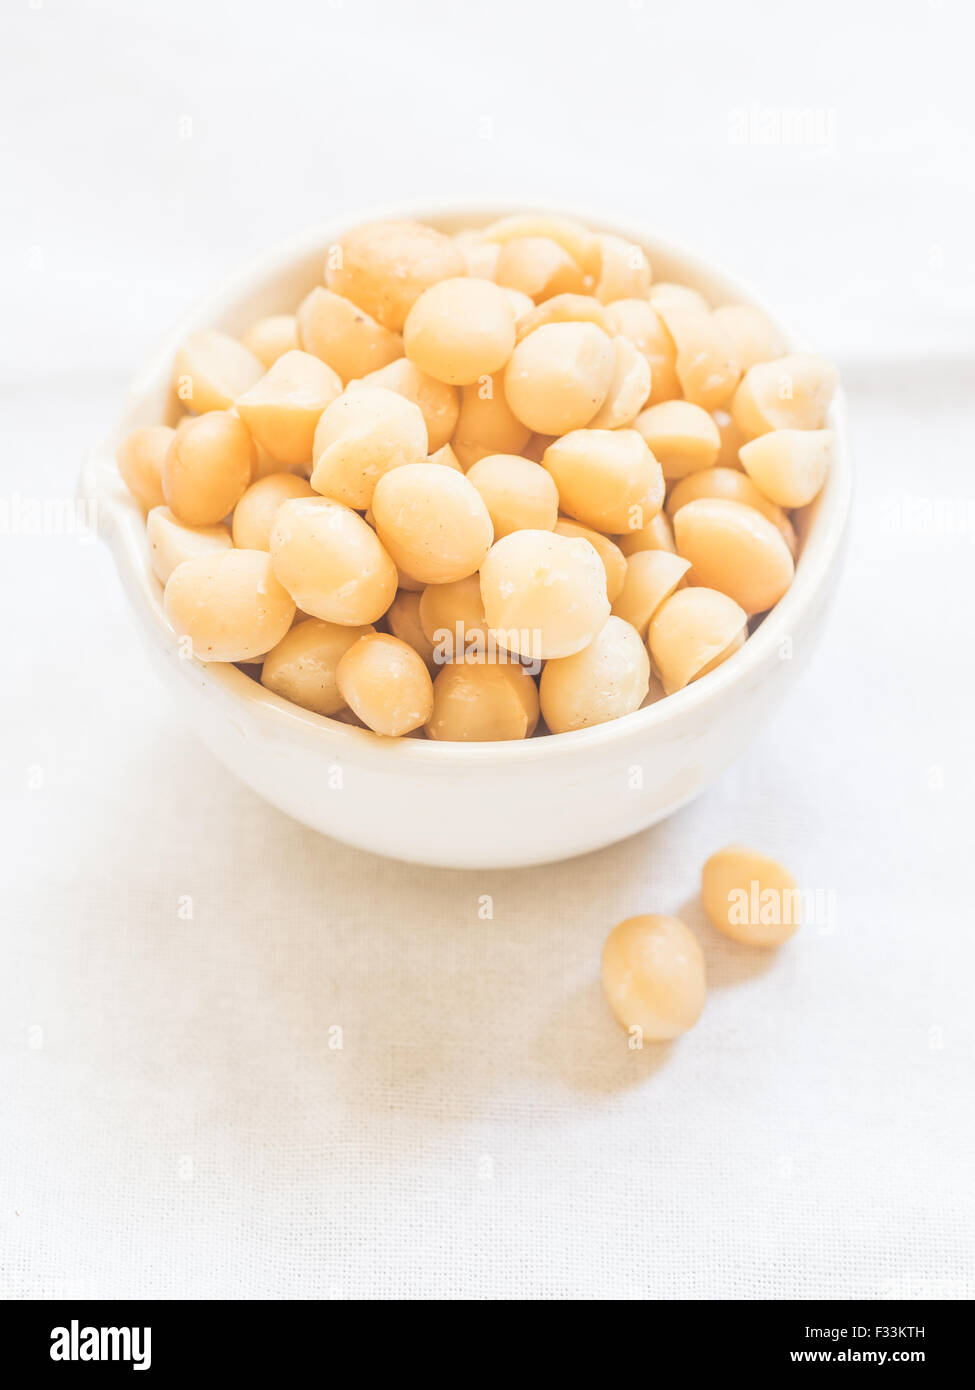 Macadamia nut in a white bowl, on a clear white background. Stock Photo